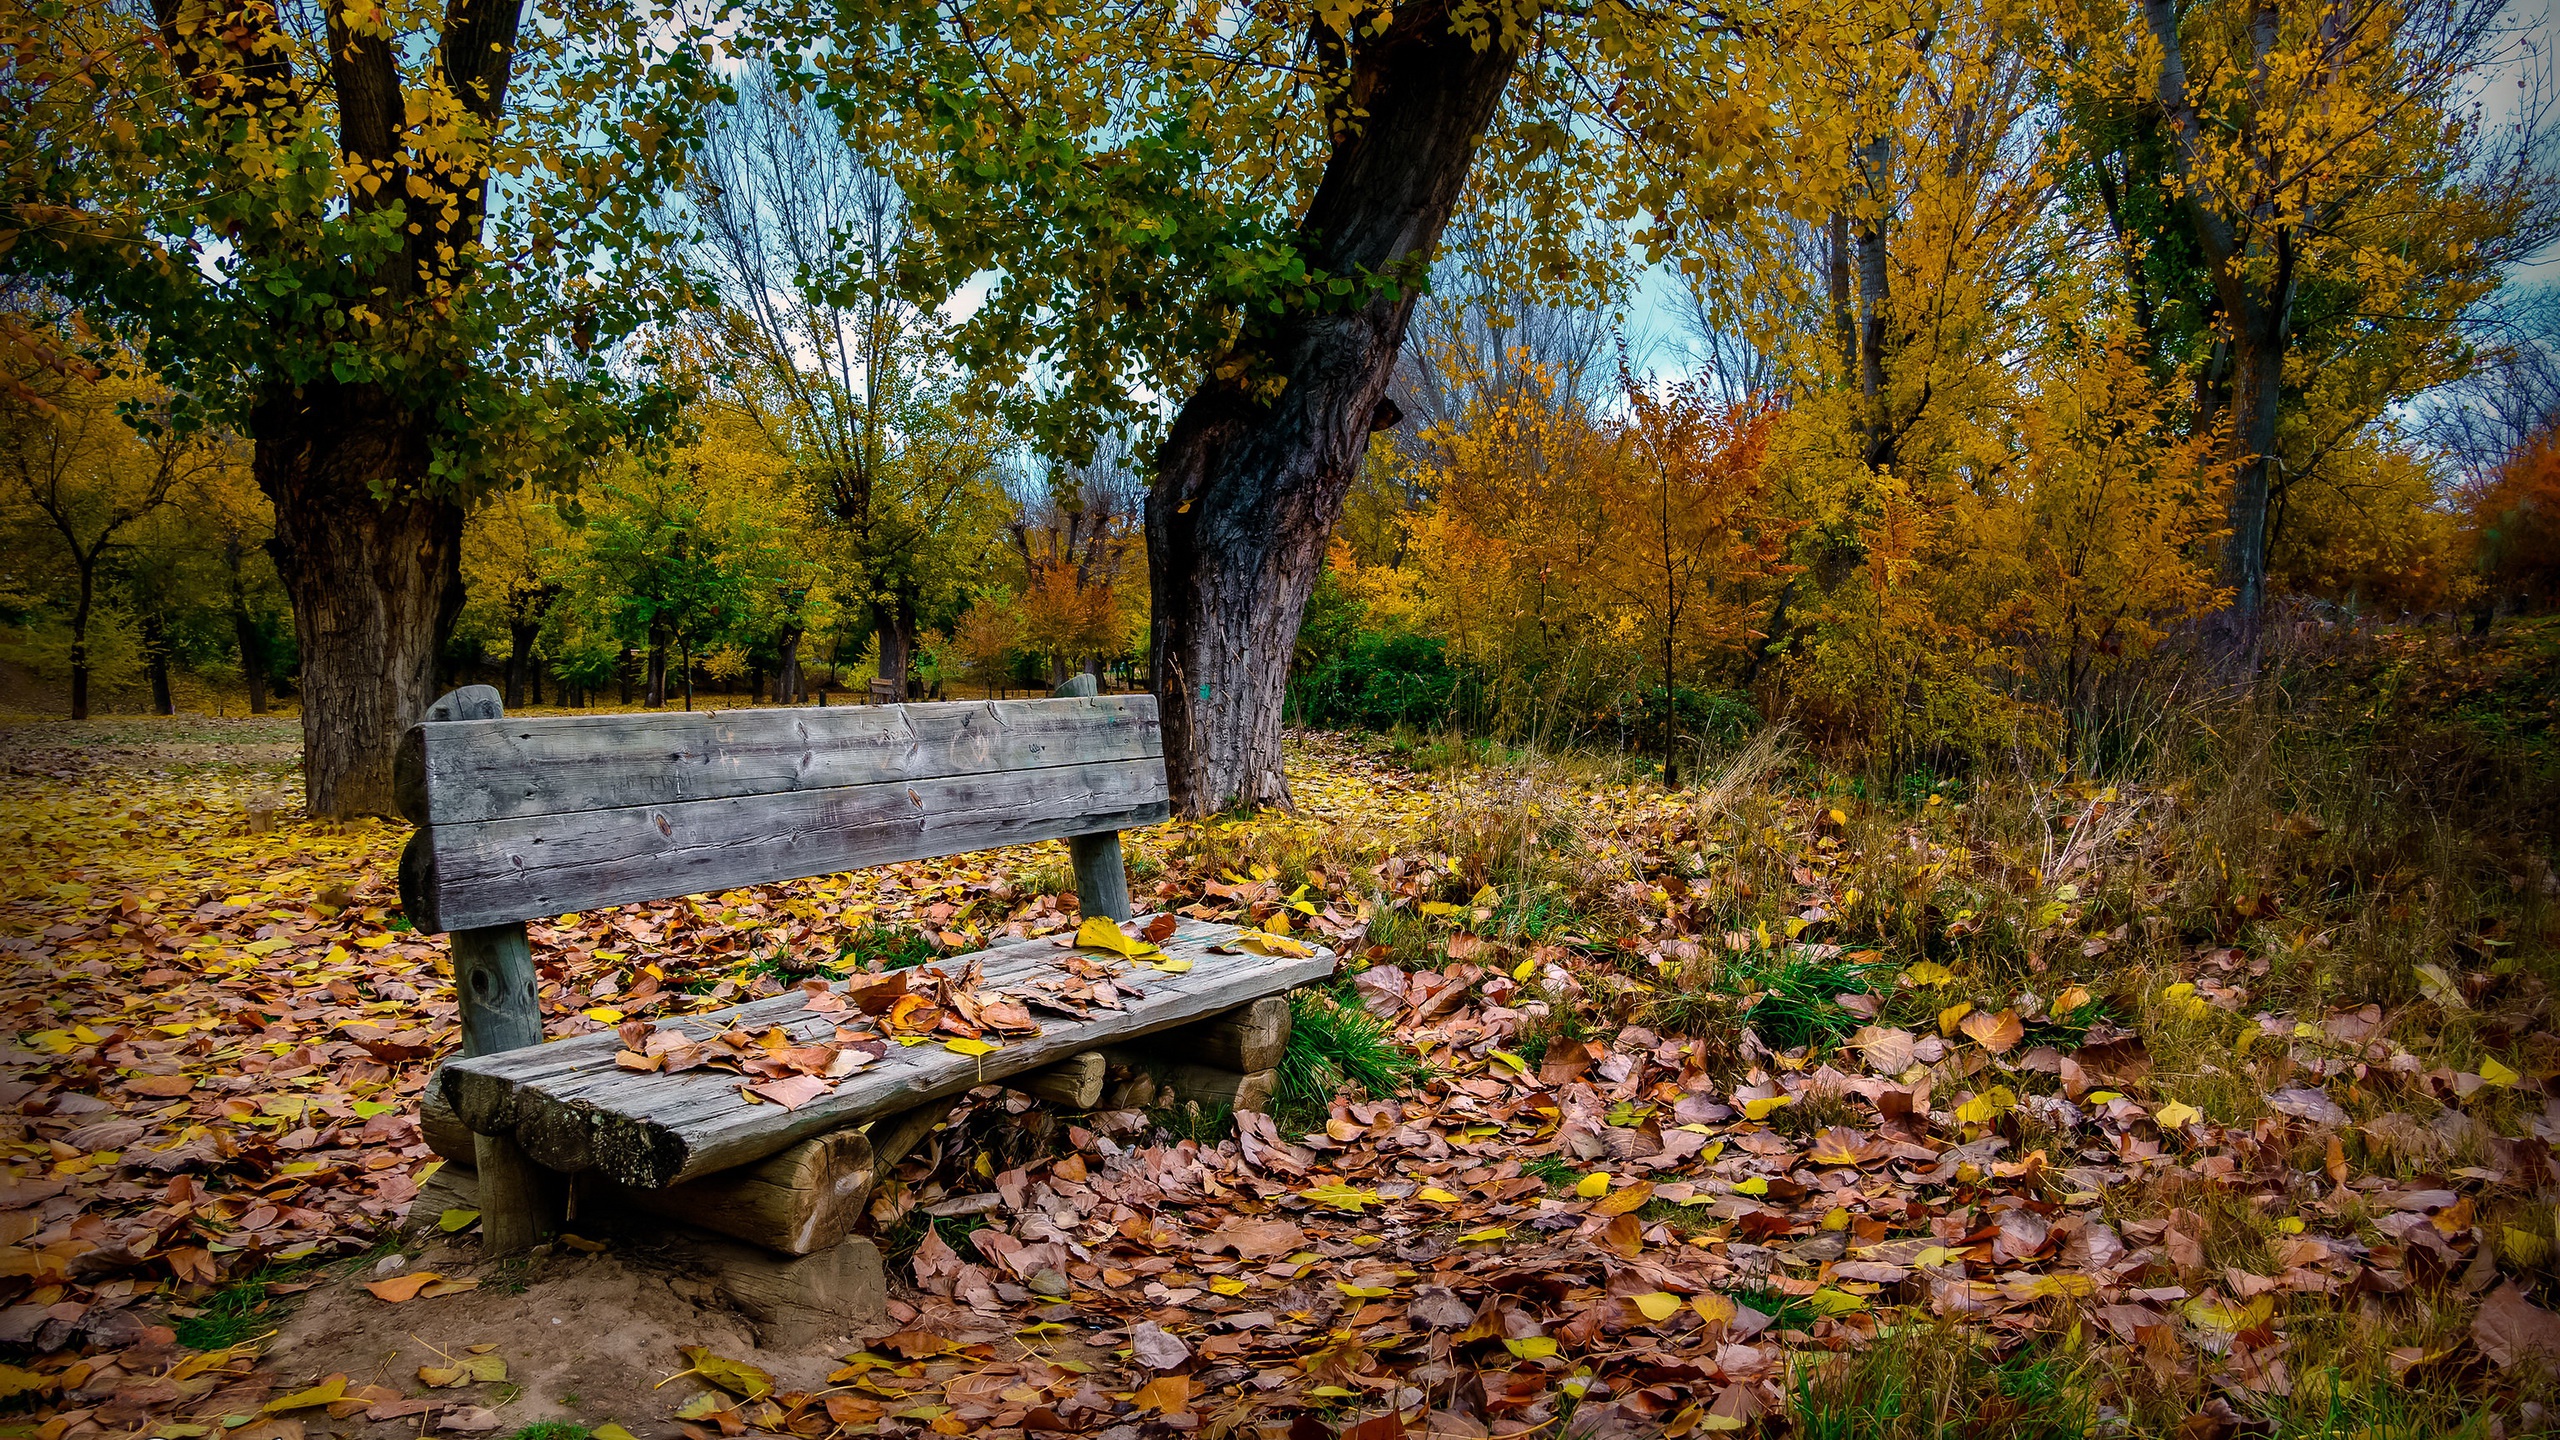 General 2560x1440 bench outdoors trees nature fall fallen leaves plants